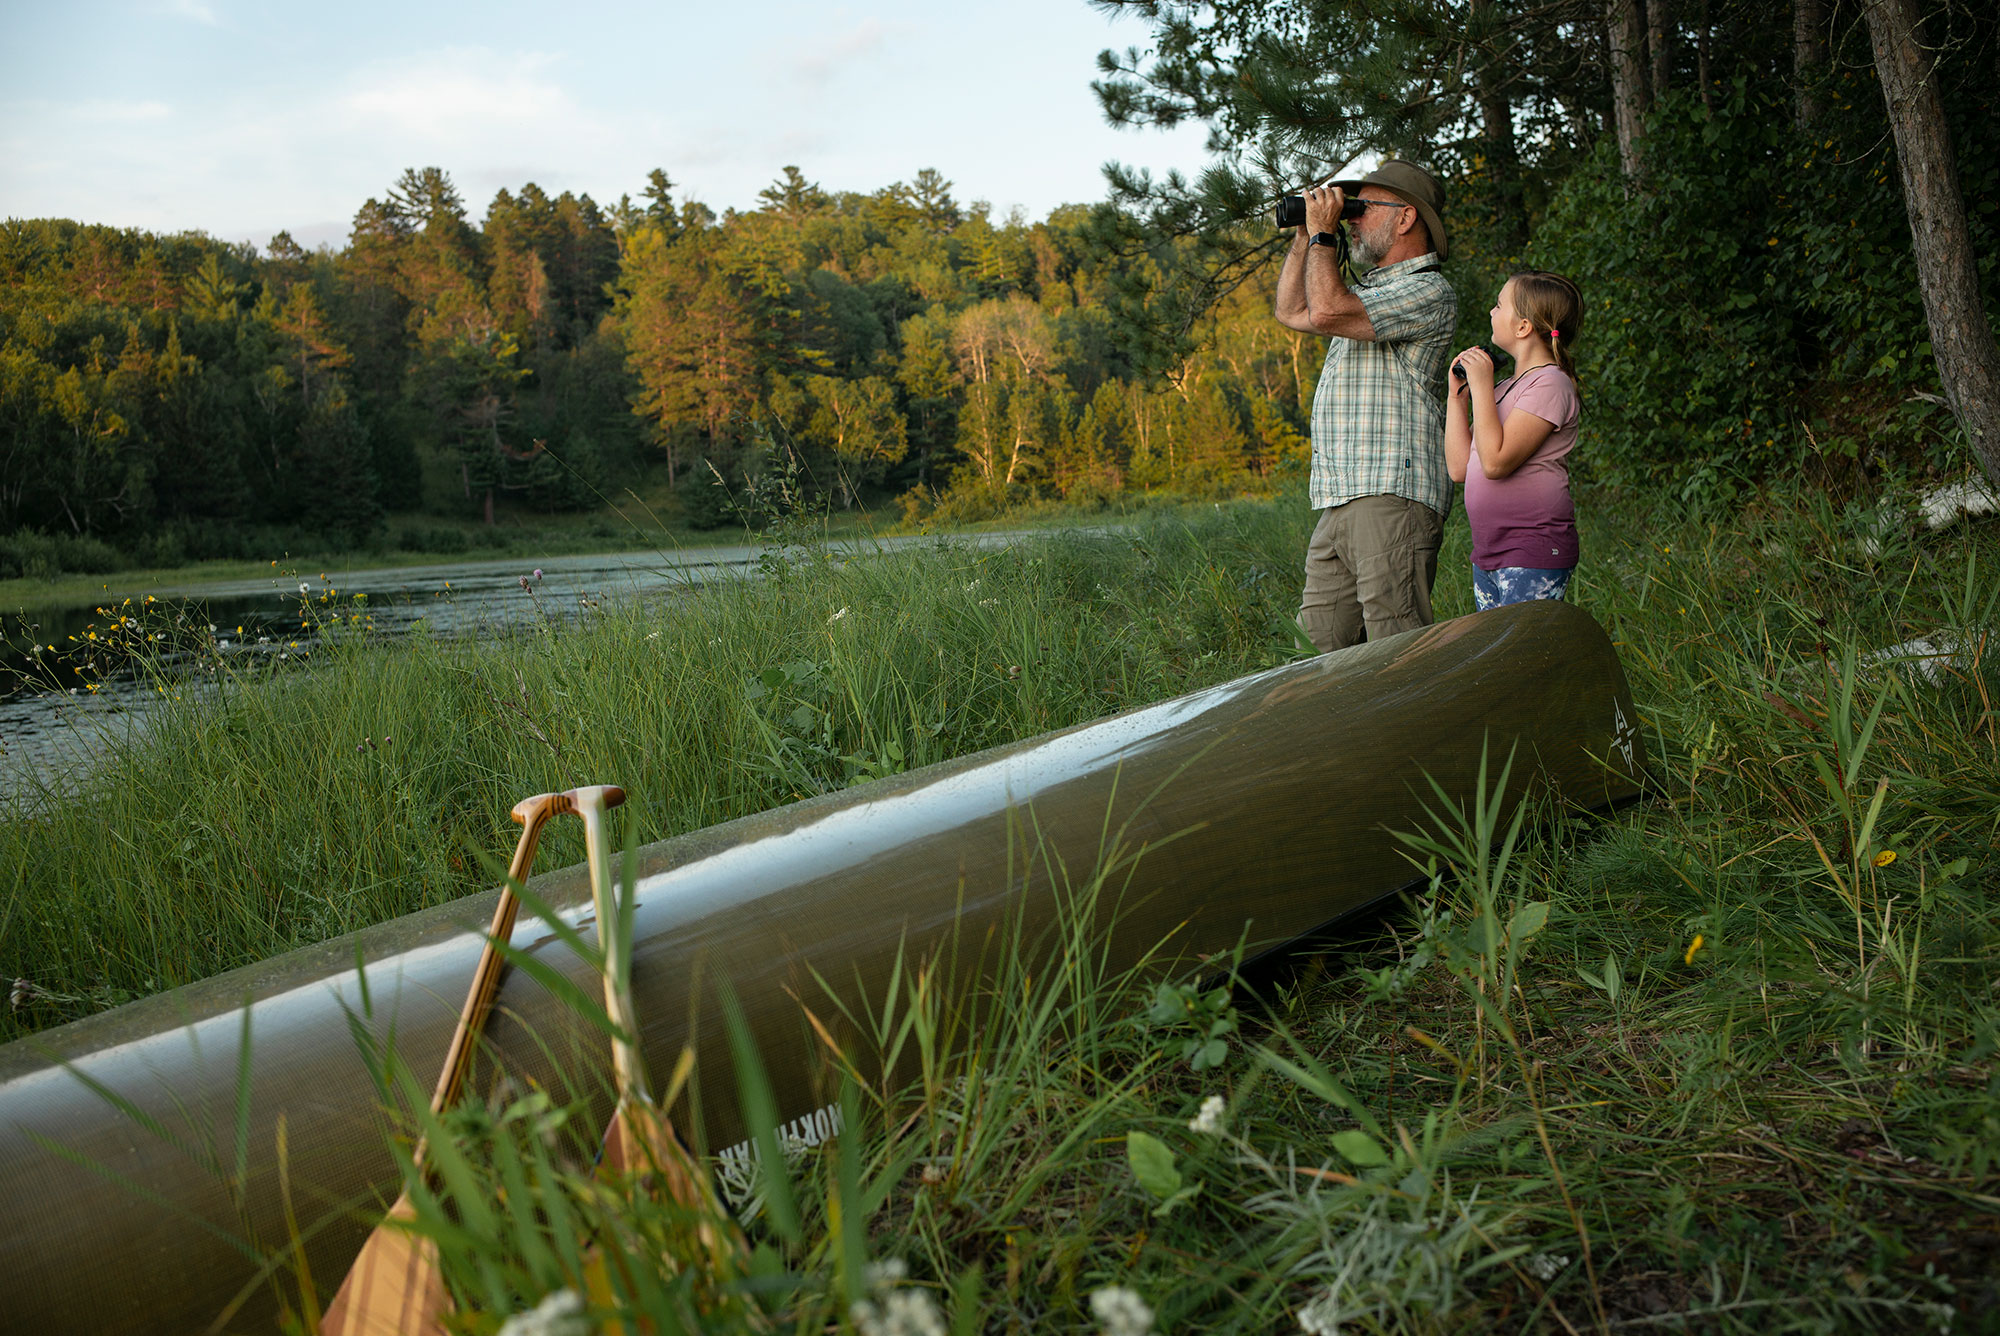 Two people looking at a canoe in the grass.